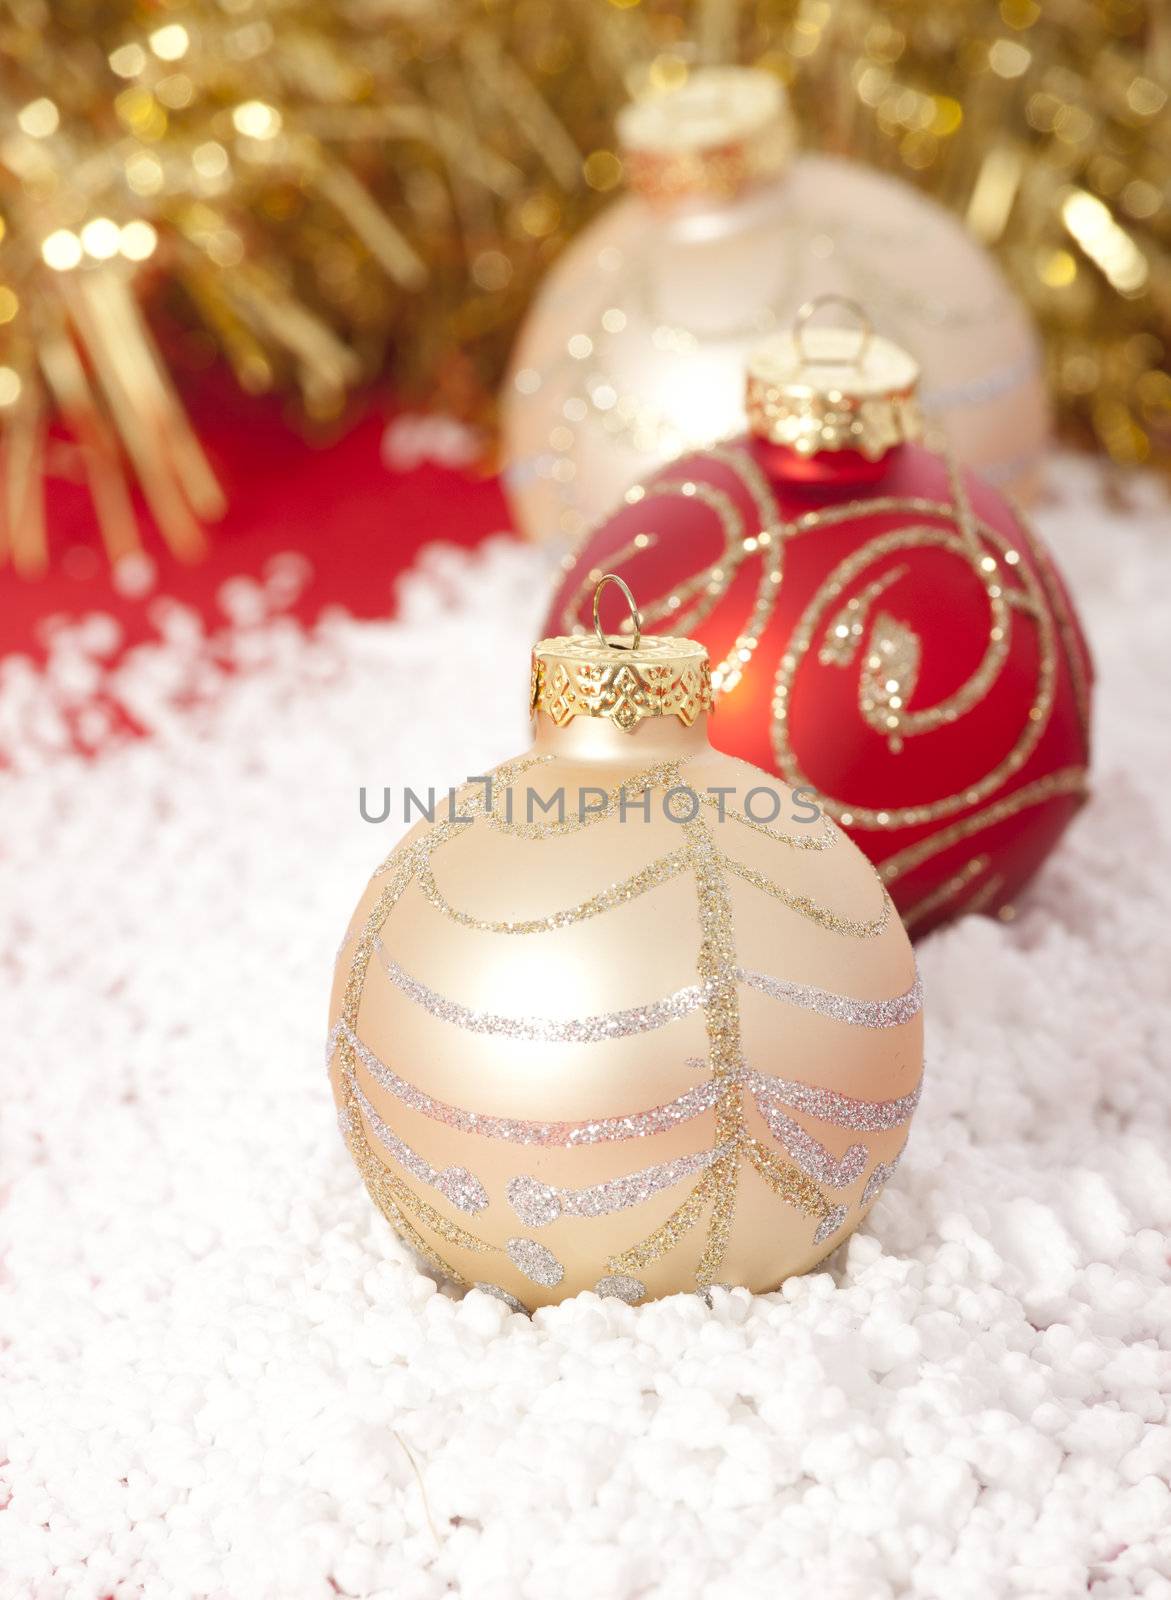 Red and gold Christmas baubles on golden background